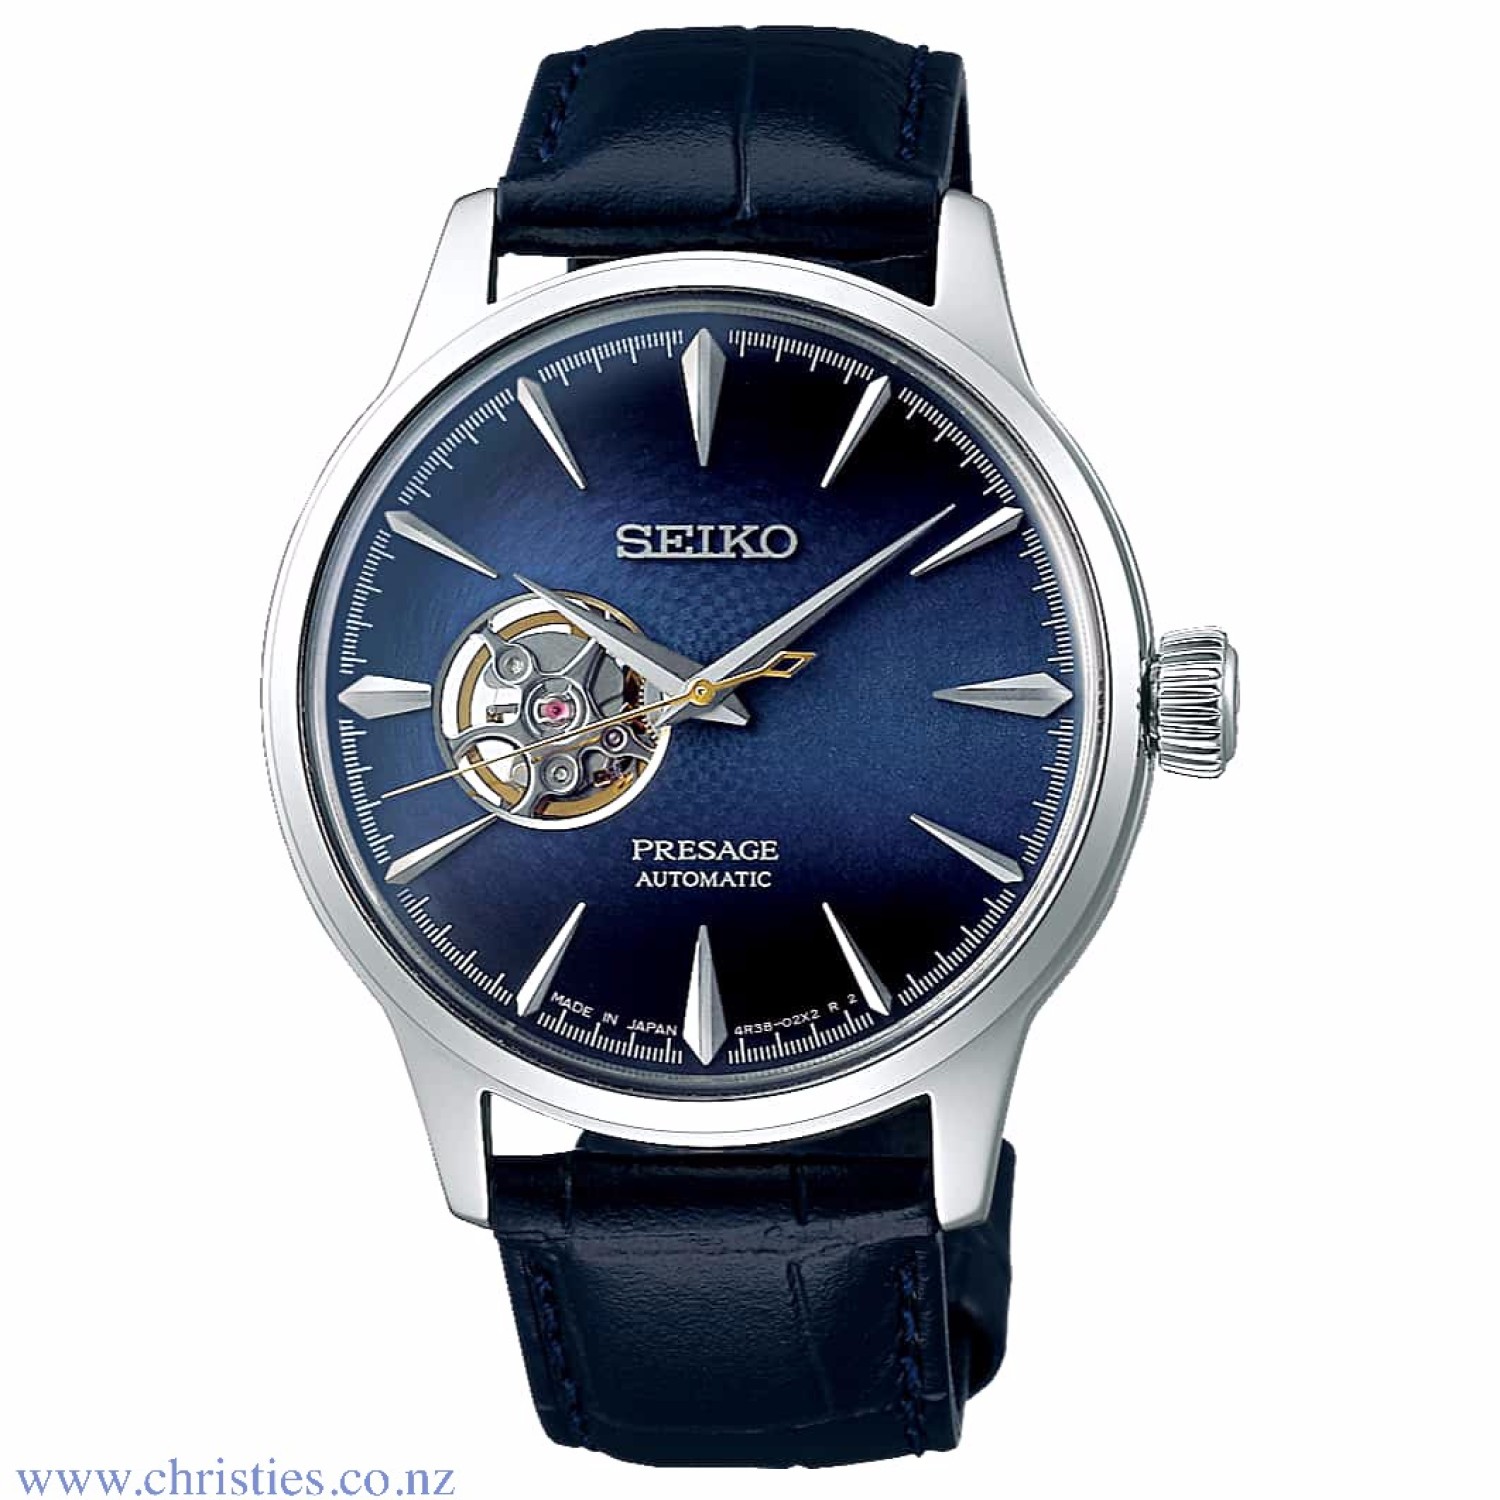 SSA405J SEIKO Presage Cocktail Blue Moon  Automatic Watch. The Seiko Presage Cocktail Time Blue Moon SSA405J is an automatic movement watch with an open heart. This mens watch features a classic looking watch with a multi tonal blue face, stainless steel 